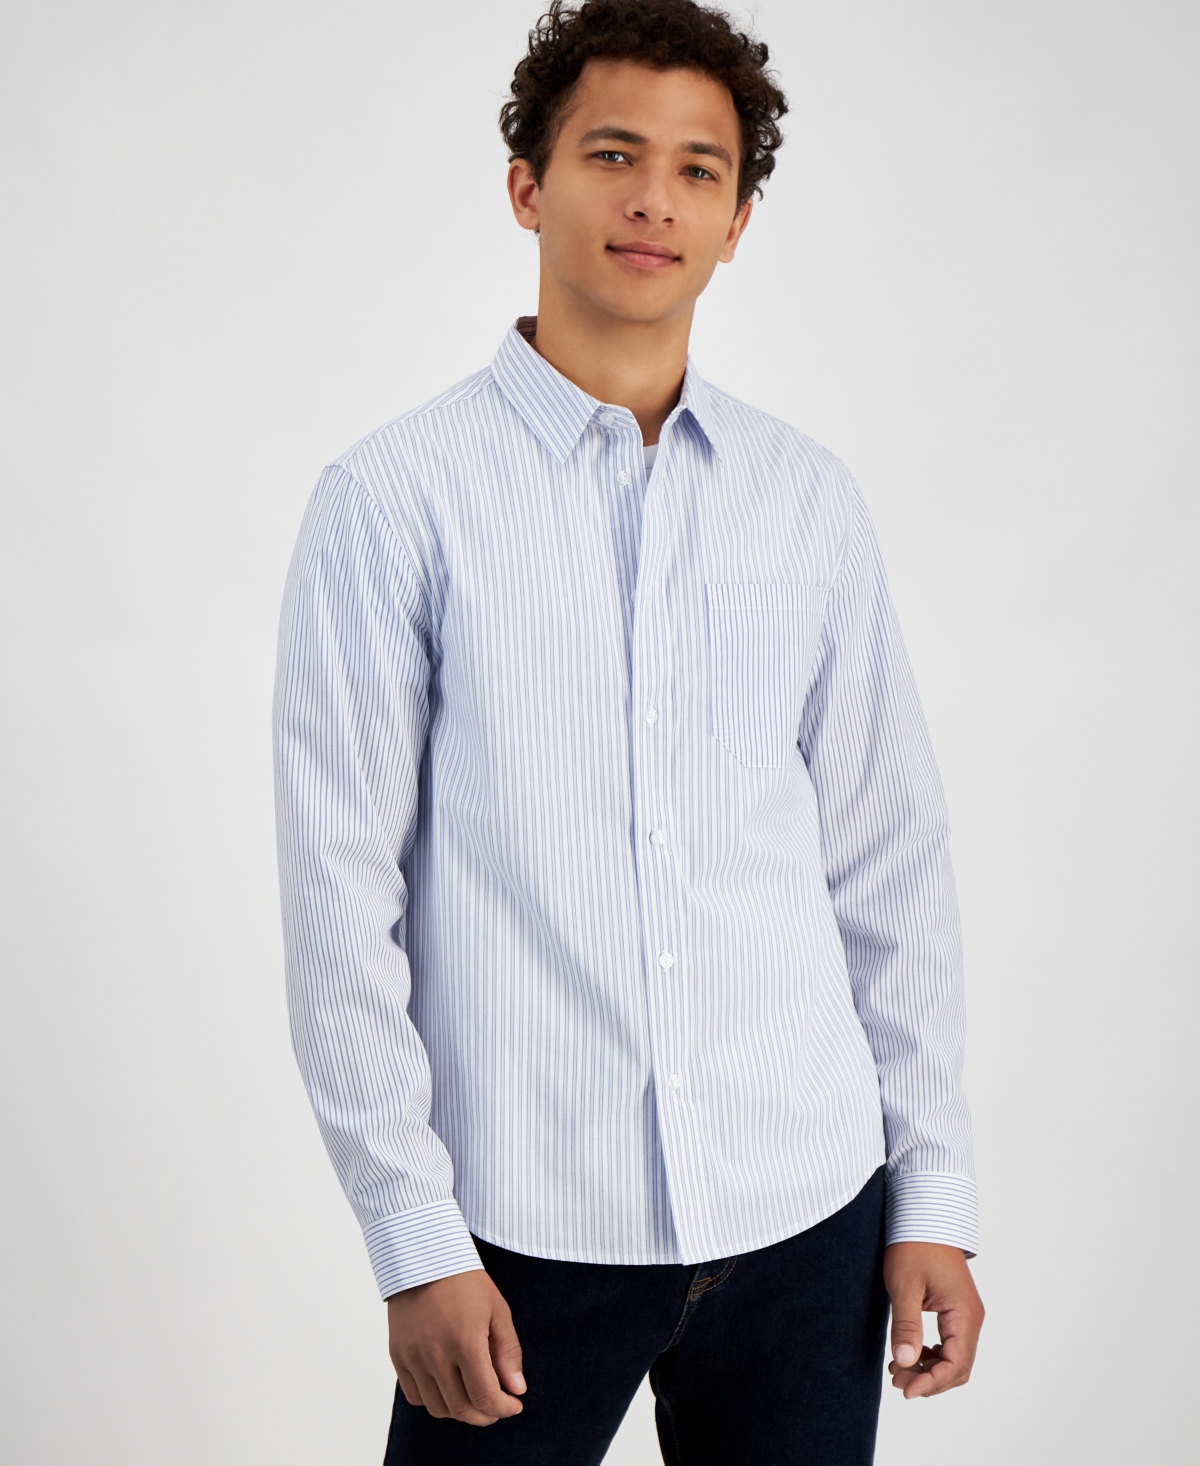 AND NOW THIS MEN'S REGULAR-FIT STRIPE BUTTON-DOWN SHIRT, CREATED FOR MACY'S